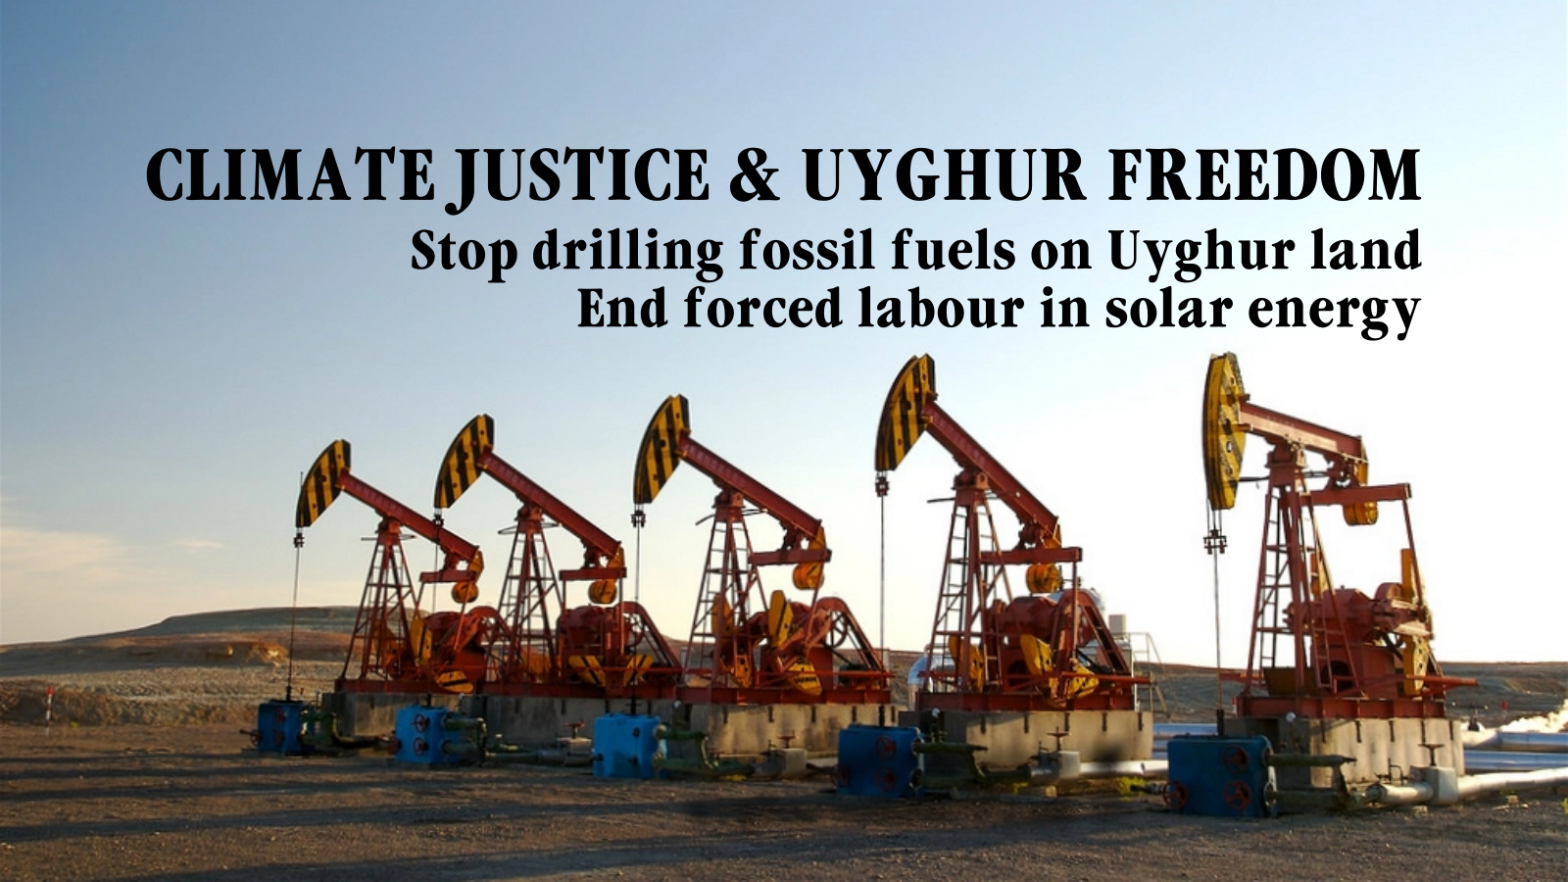 Text reading "CLIMATE JUSTICE & UYGHUR FREEDOM // Stop drilling fossil fuels on Uyghur land // End forced labour in solar energy" superimposed on a photo of oil pumps on the Karamay oil fields